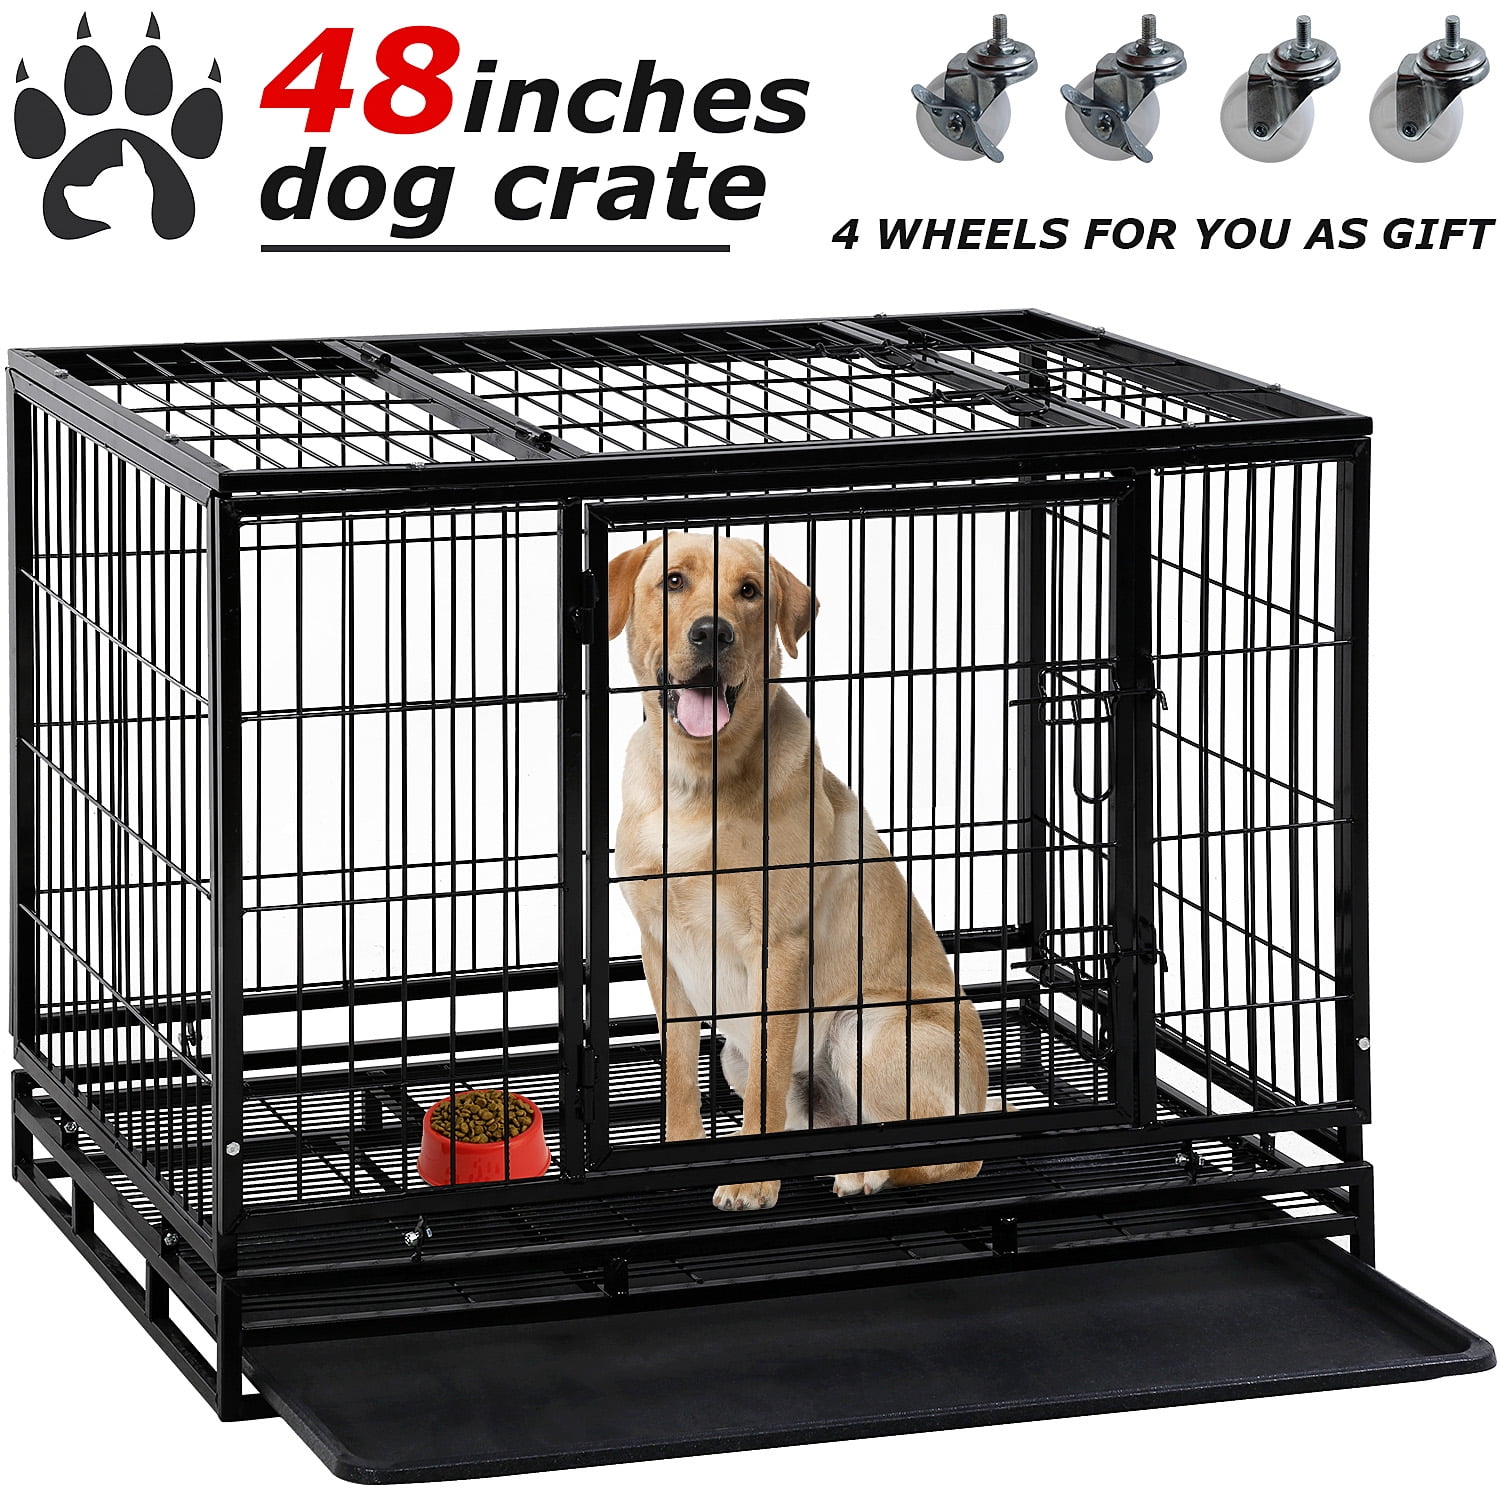 dog-crate-cage-for-large-dogs-heavy-duty-48-inches-dog-kennel-pet